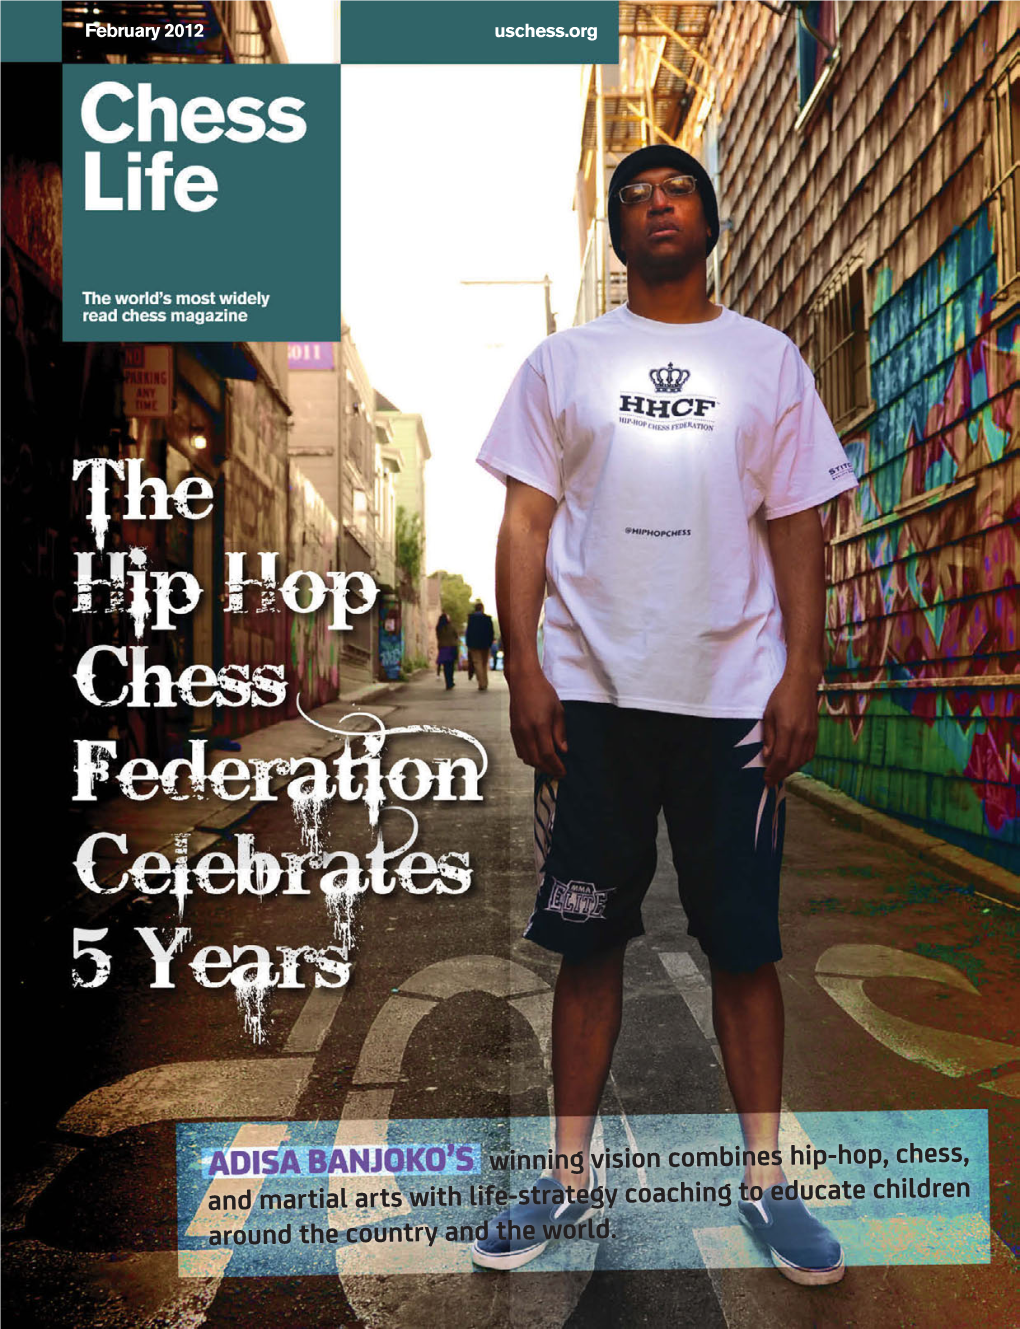 Winning Vision Combines Hip-Hop, Chess, and Martial Arts with Life